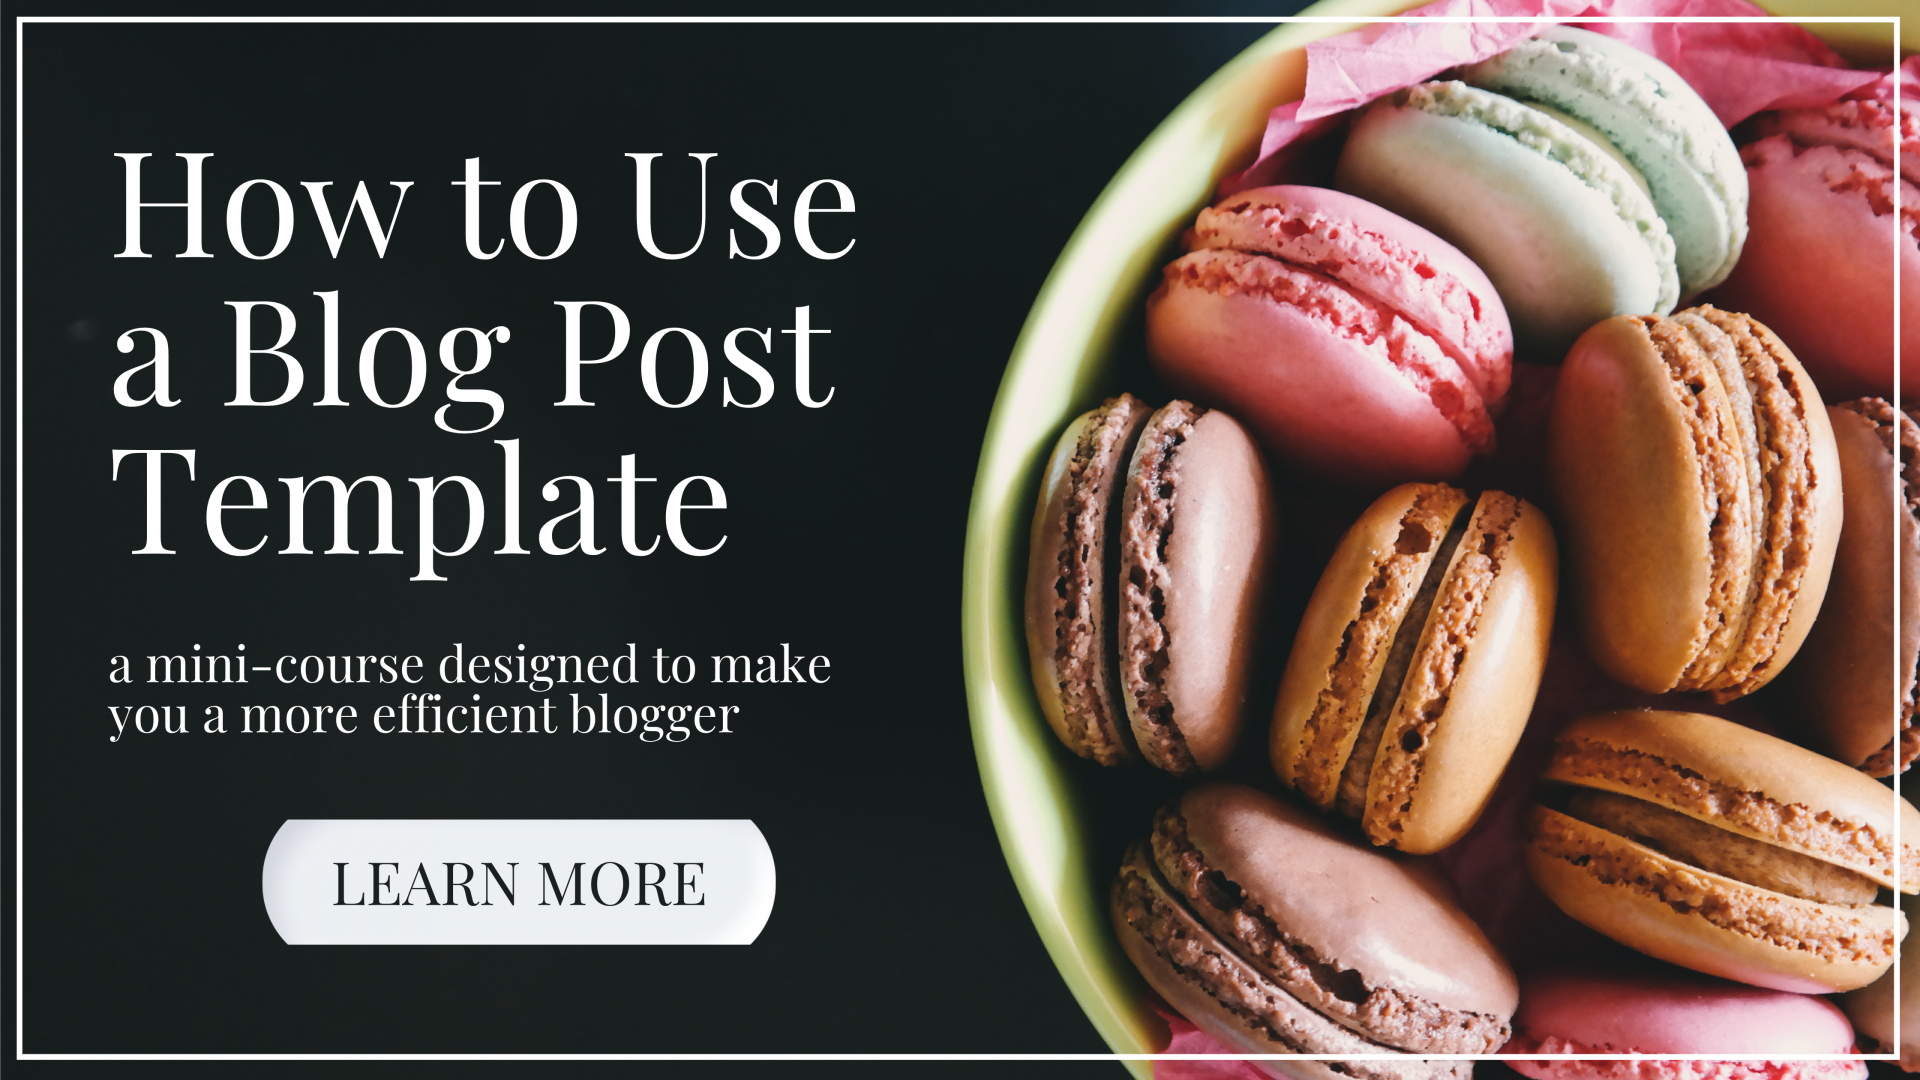 How to Use a Blog Post Template